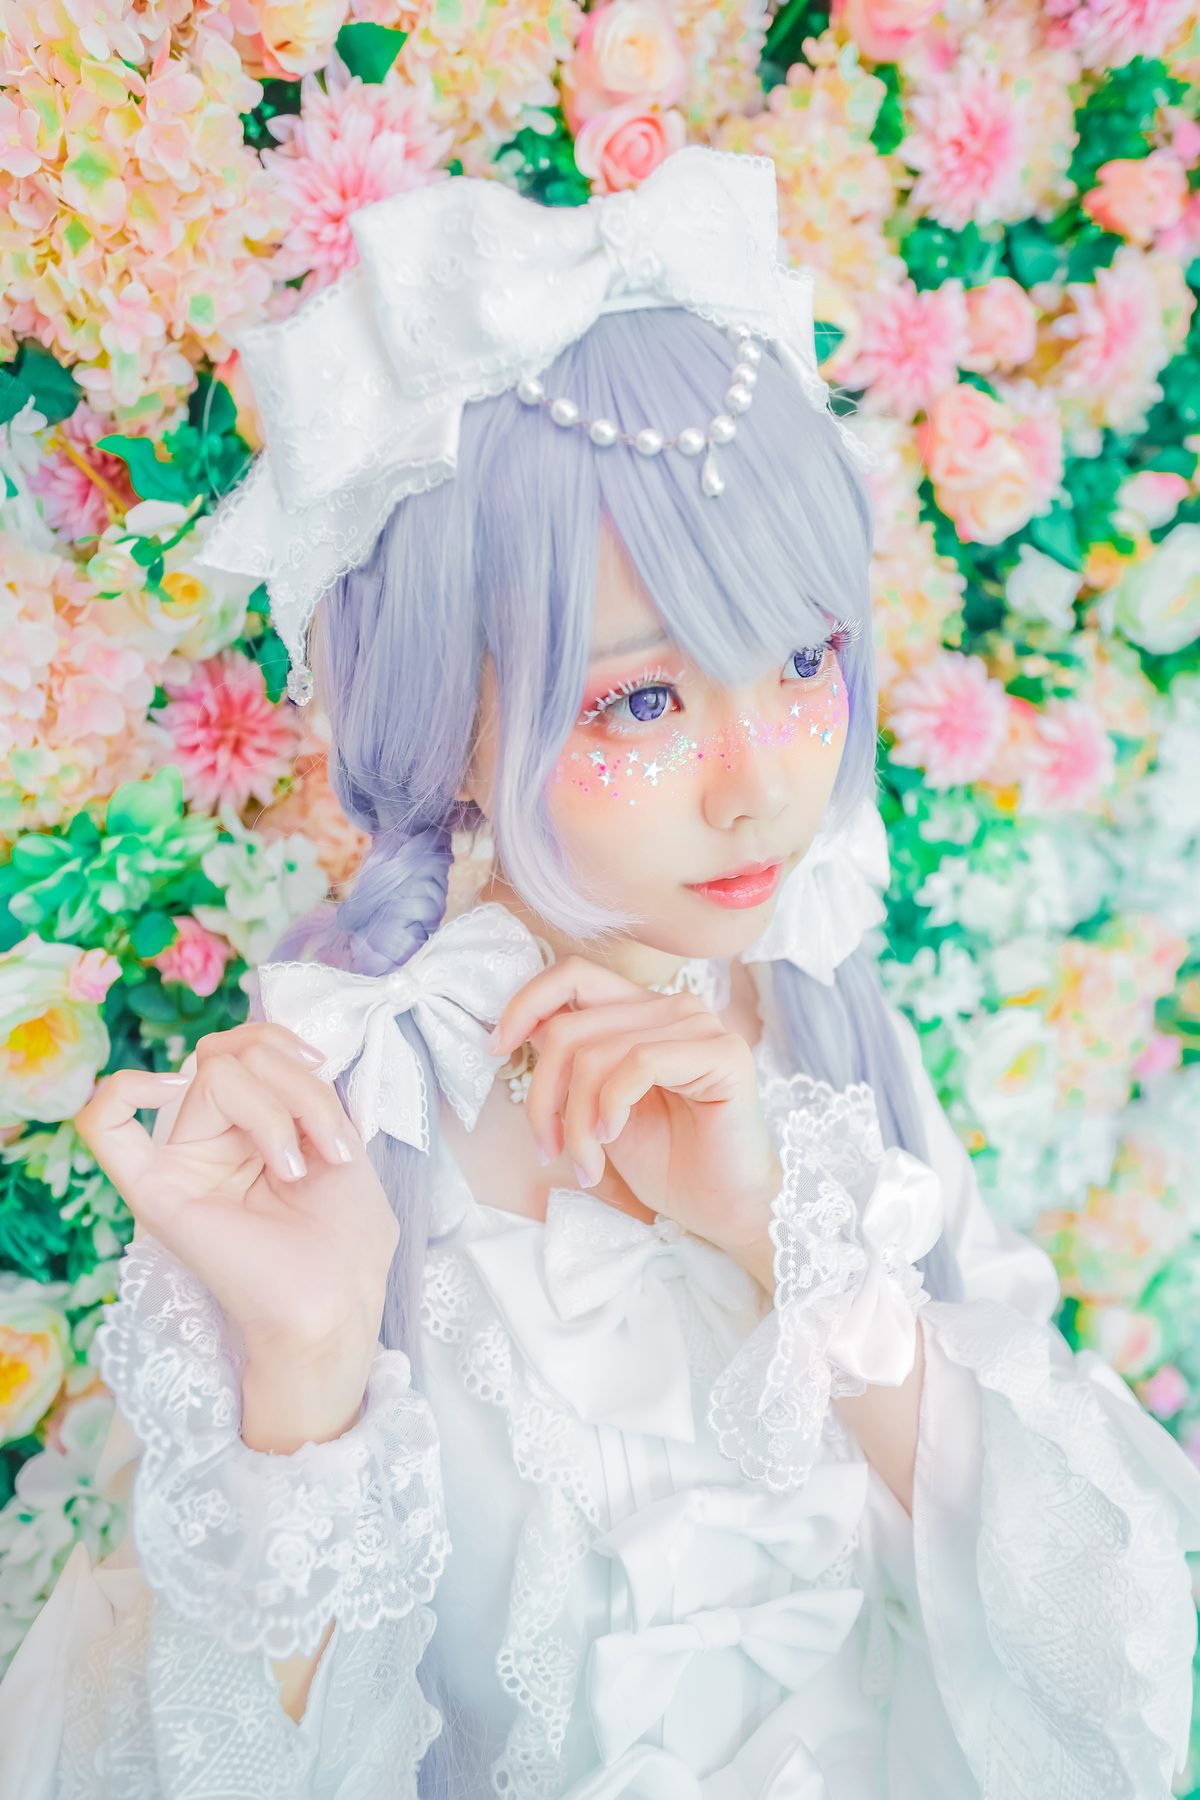 Coser@Ely_eee ElyEE子 TUESDAY TWINTAIL A 0057 9142696839.jpg